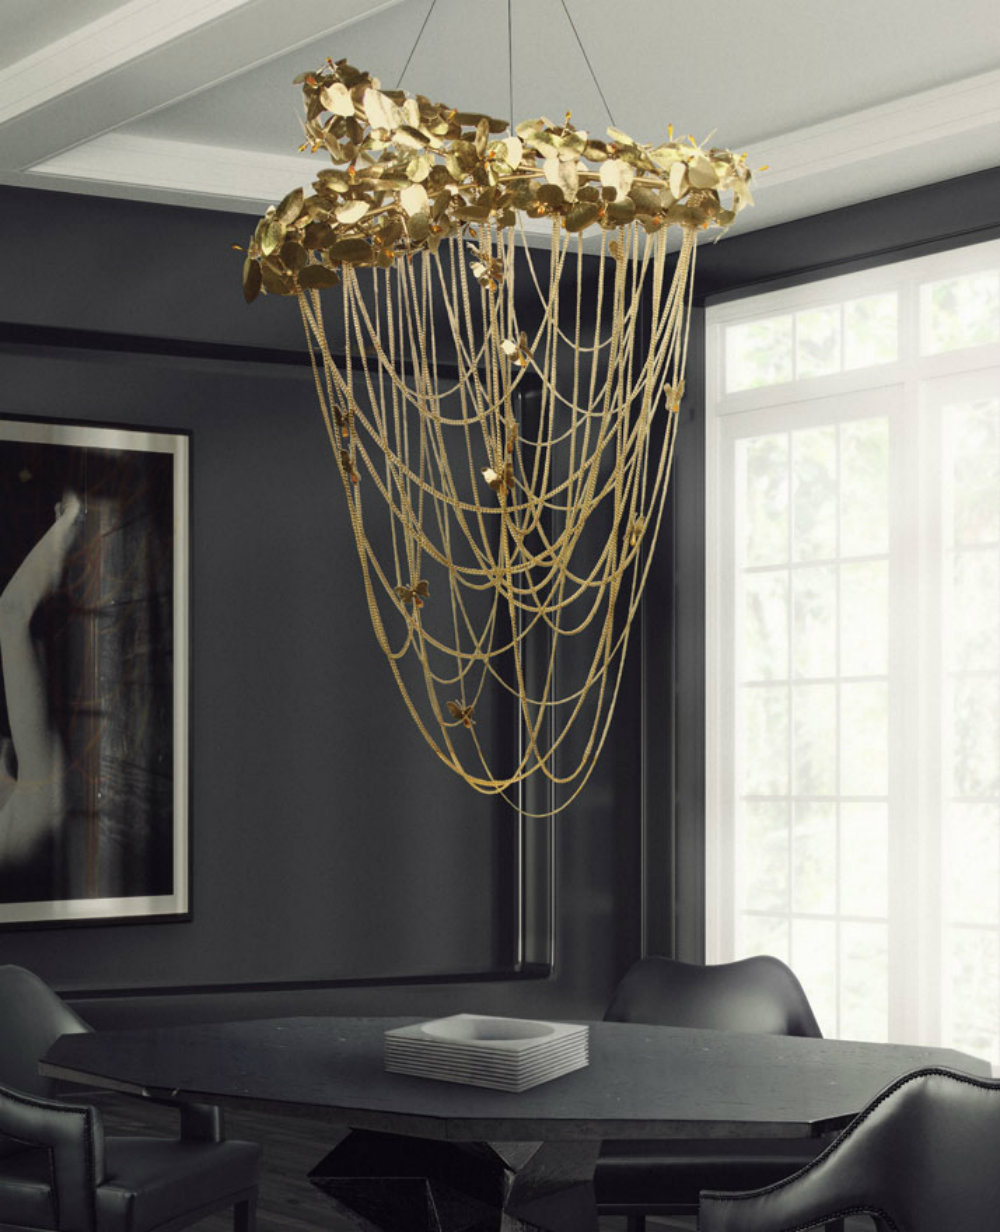 The Most Luxurious Chandelier Inspiration For Your Next Design Project